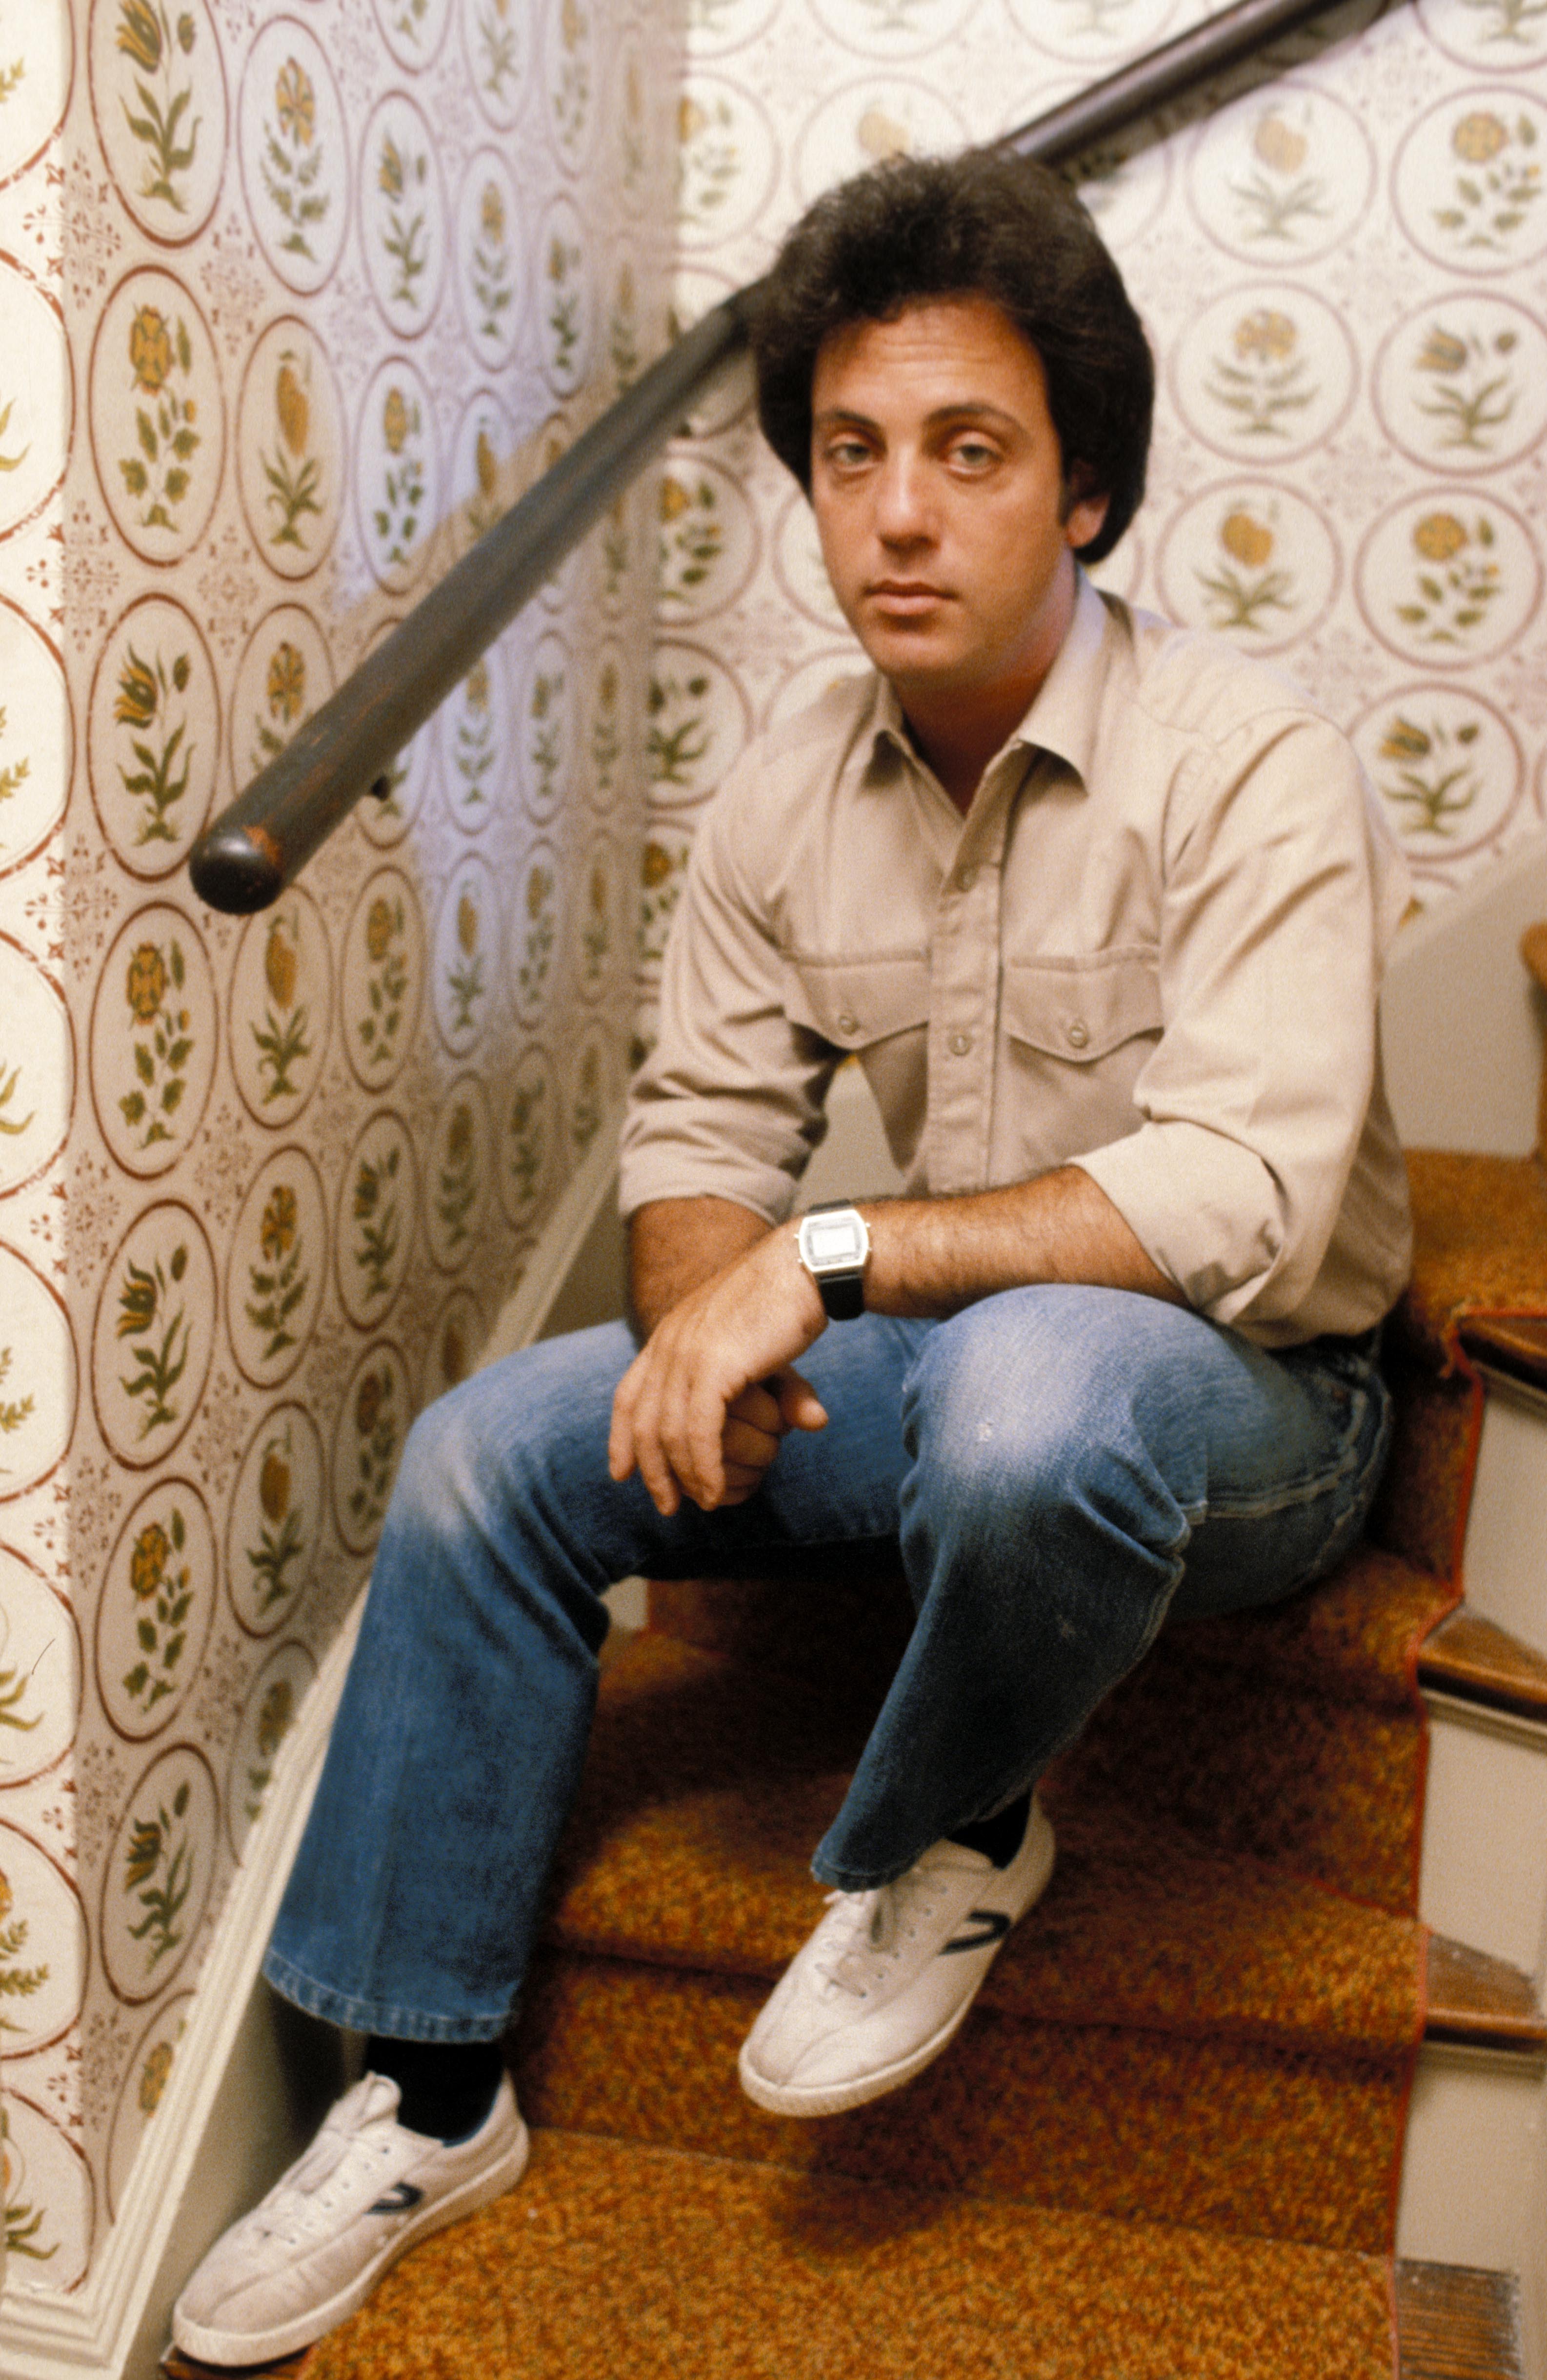 Rock & Roll Hall of Famer Billy Joel sitting on a staircase wearing a beige shirt paired with jeans and white sneakers. / Source: Getty Images